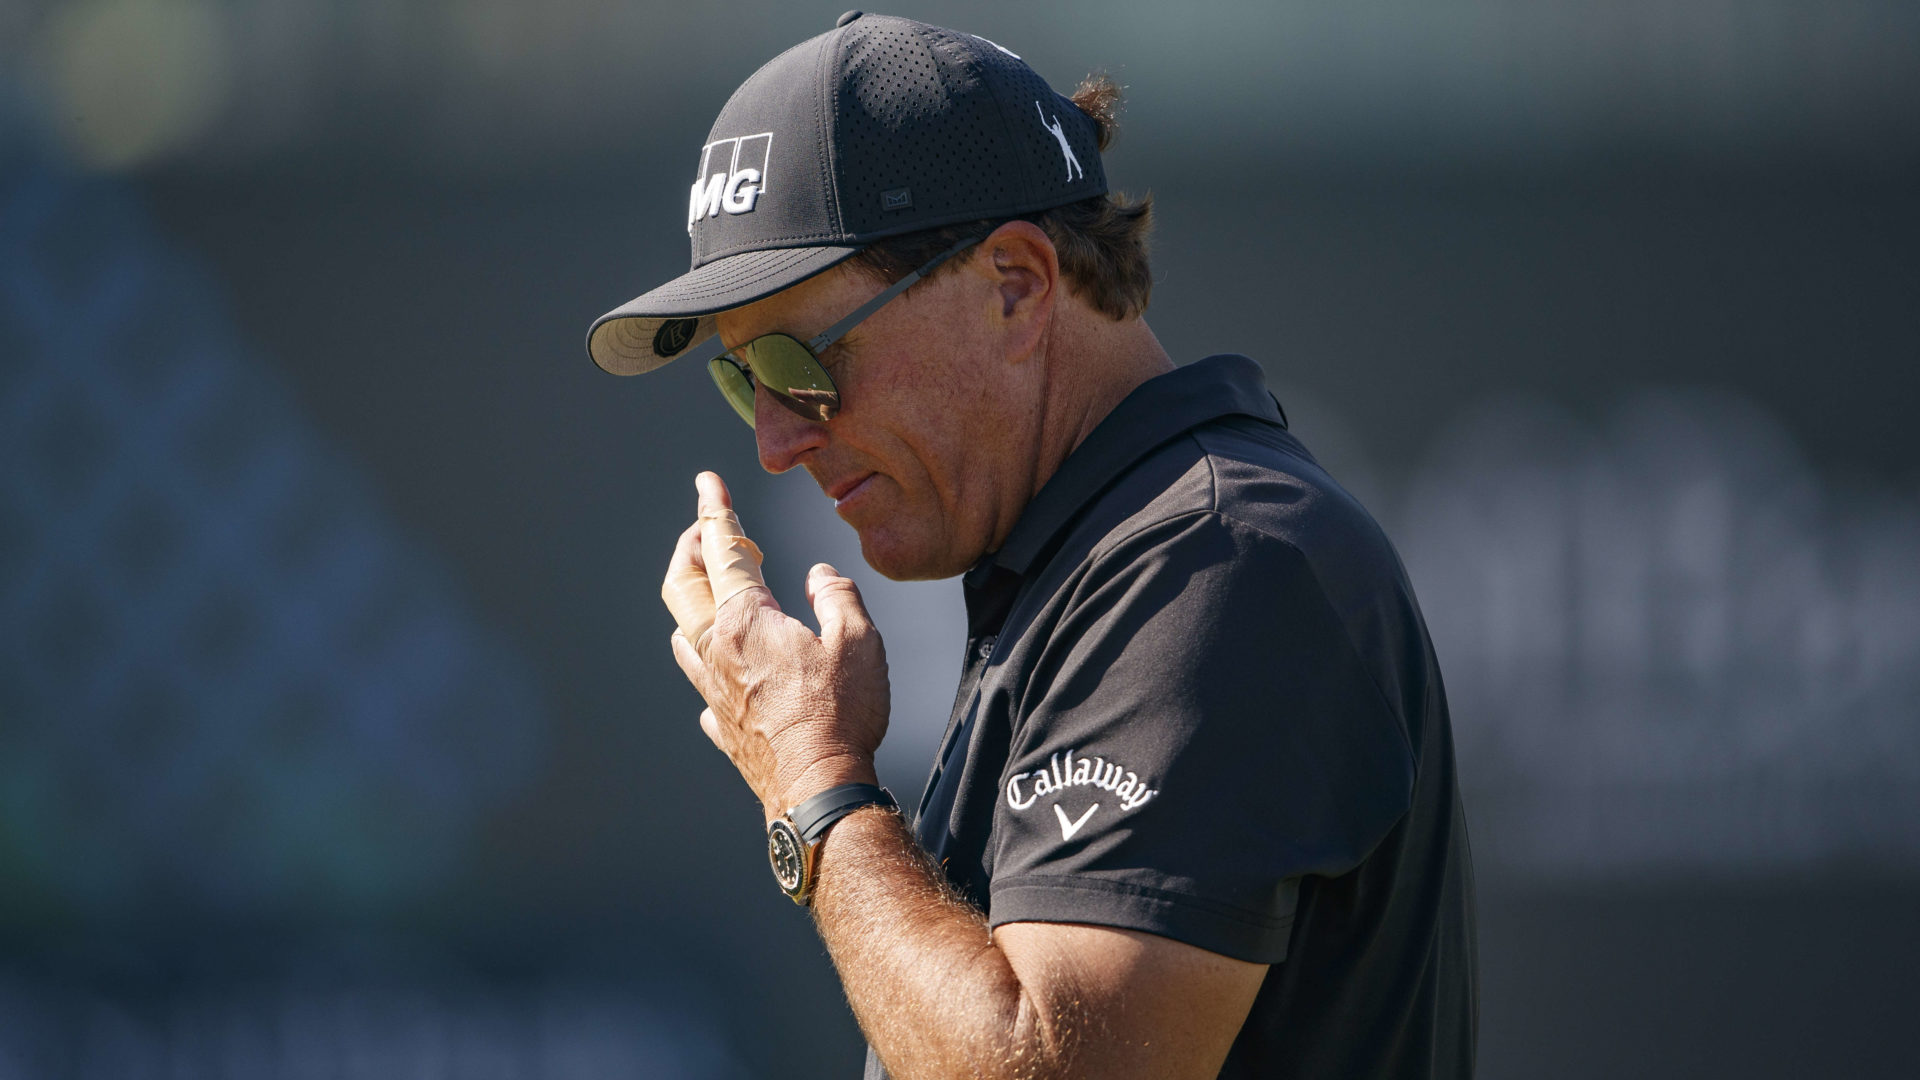 AL MUROOJ, SAUDI ARABIA - FEBRUARY 01: Phil Mickelson of The USA during a practice round prior to the PIF Saudi International at Royal Greens Golf & Country Club on February 01, 2022 in Al Murooj, Saudi Arabia. (Photo by Oisin Keniry/Getty Images)